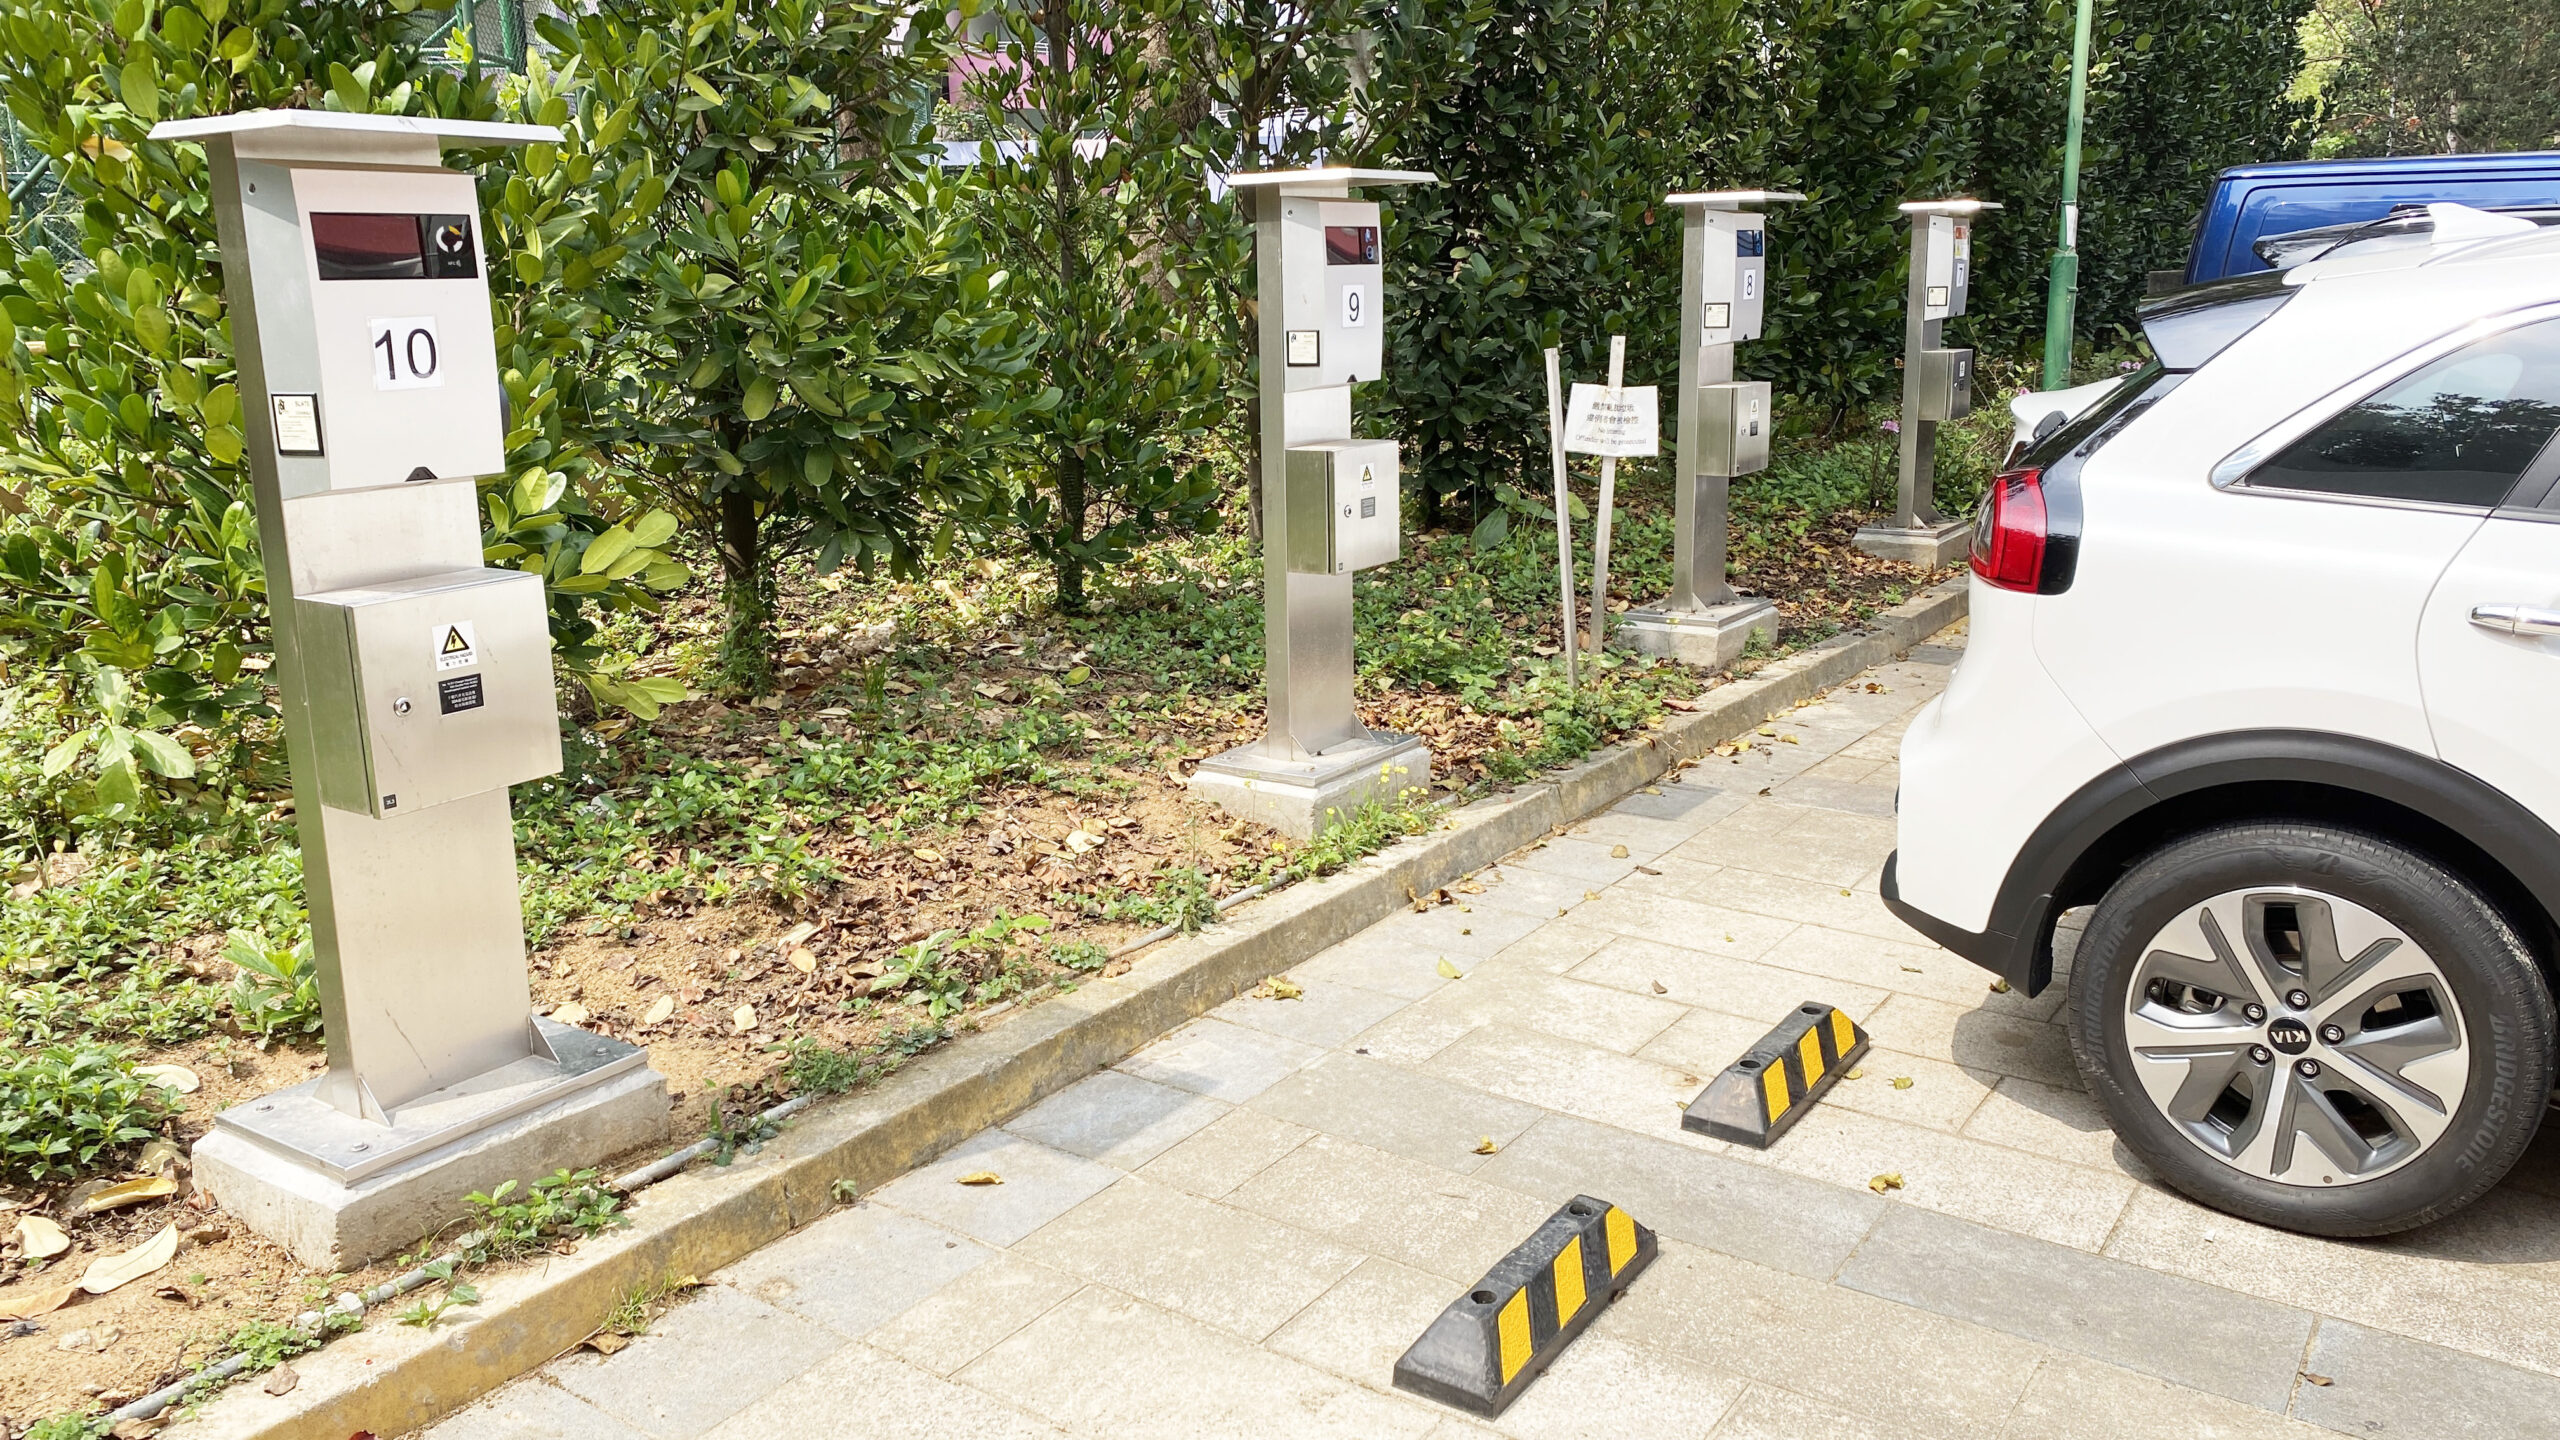 Organisation sets up 400 additional charging points covering 4 major types of venues to work with government’s plan to increase local EV adoption